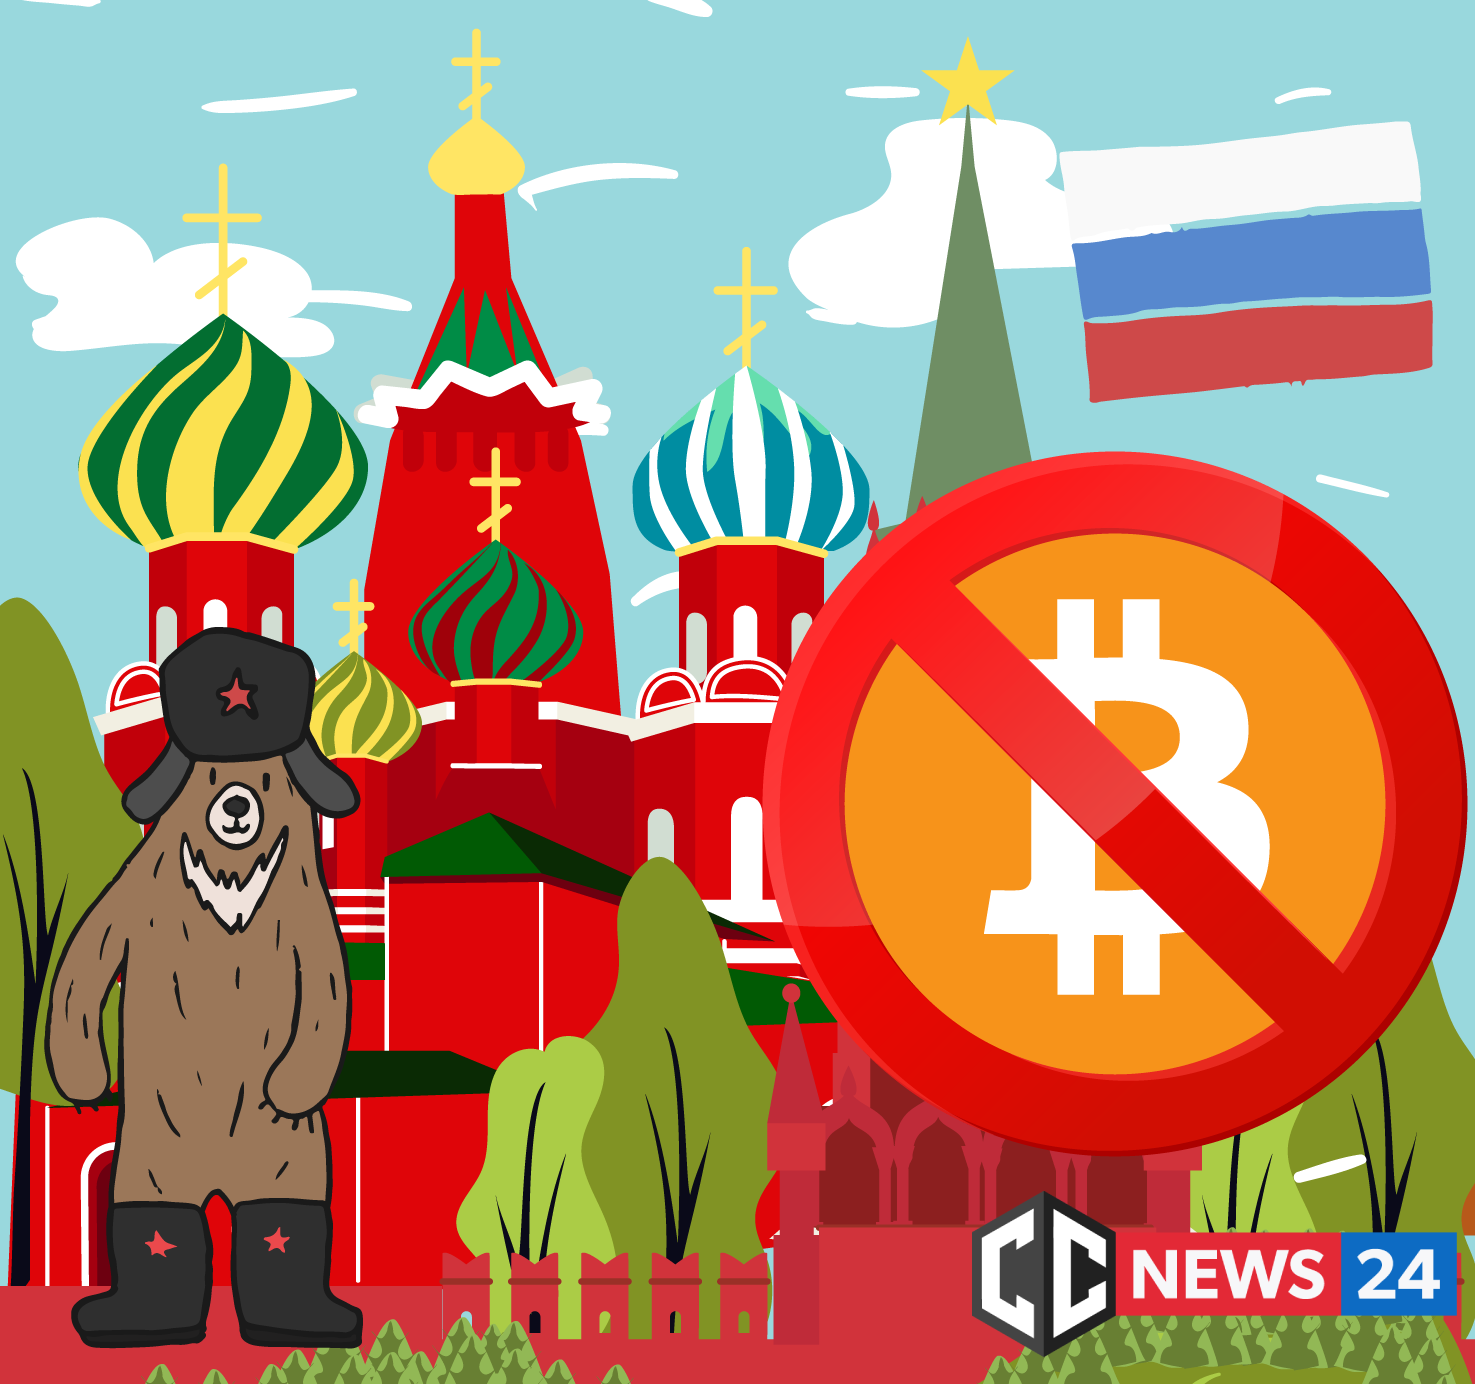 Russia is Banning the circulation and issuing of Cryptocurrencies